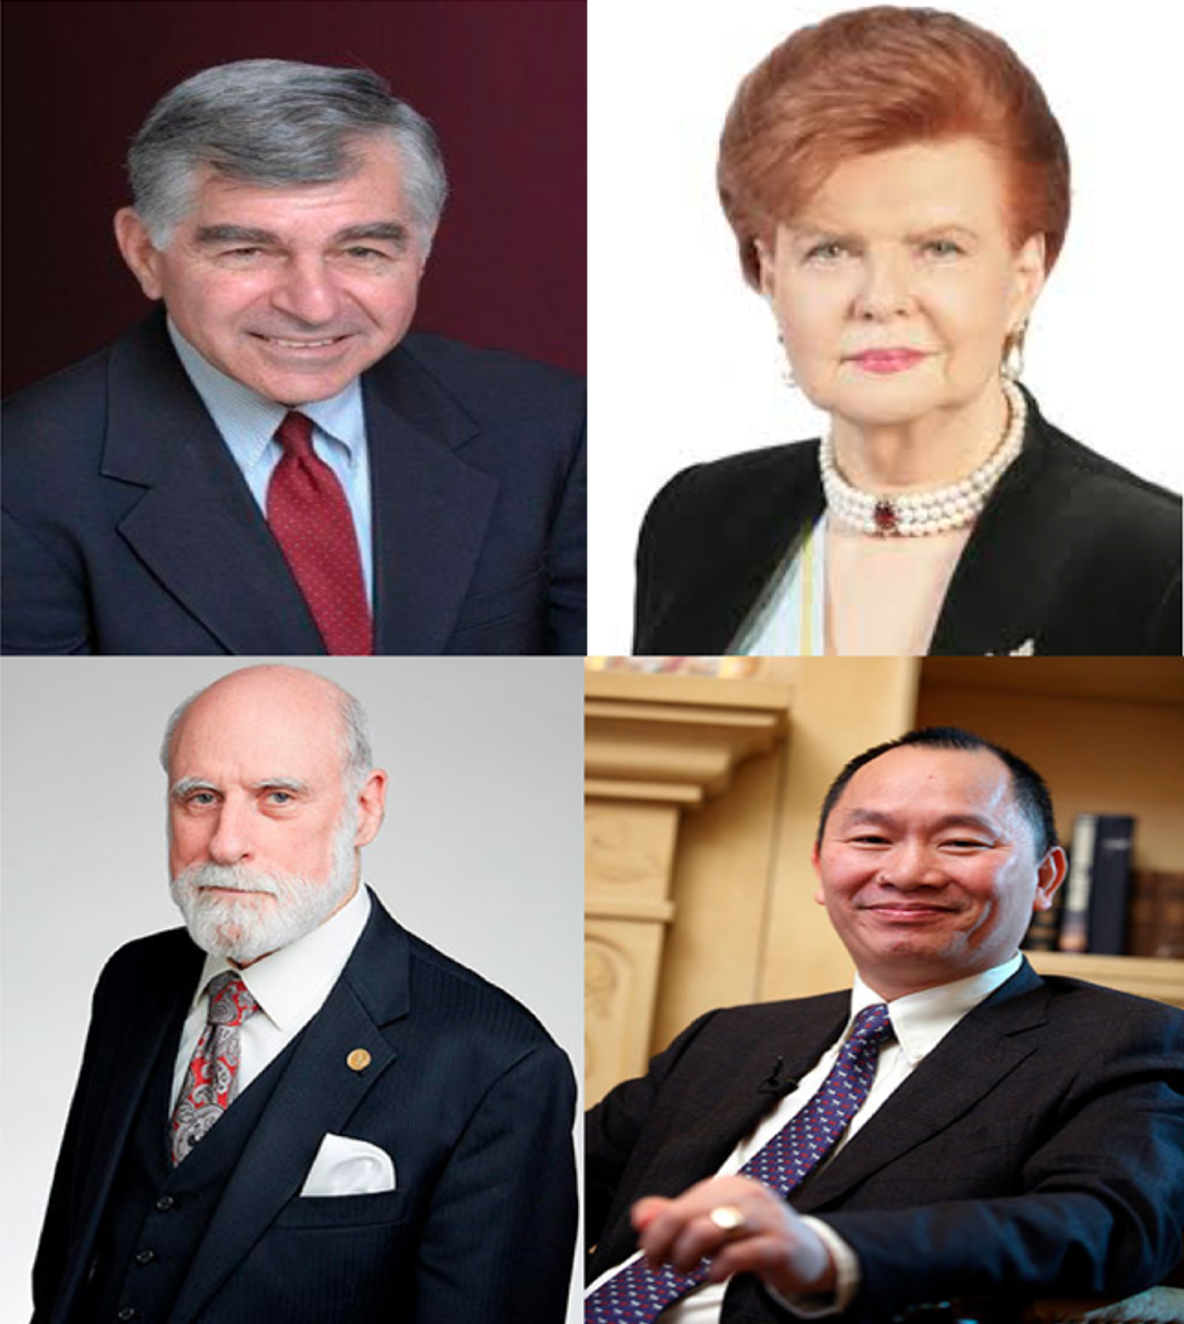 Governor Michael Dukakis, President Vaira Vike-Freiberga, and Father of the Internet Vint Cerf invite organizations and individuals to sign the Social Contract for the AI Age